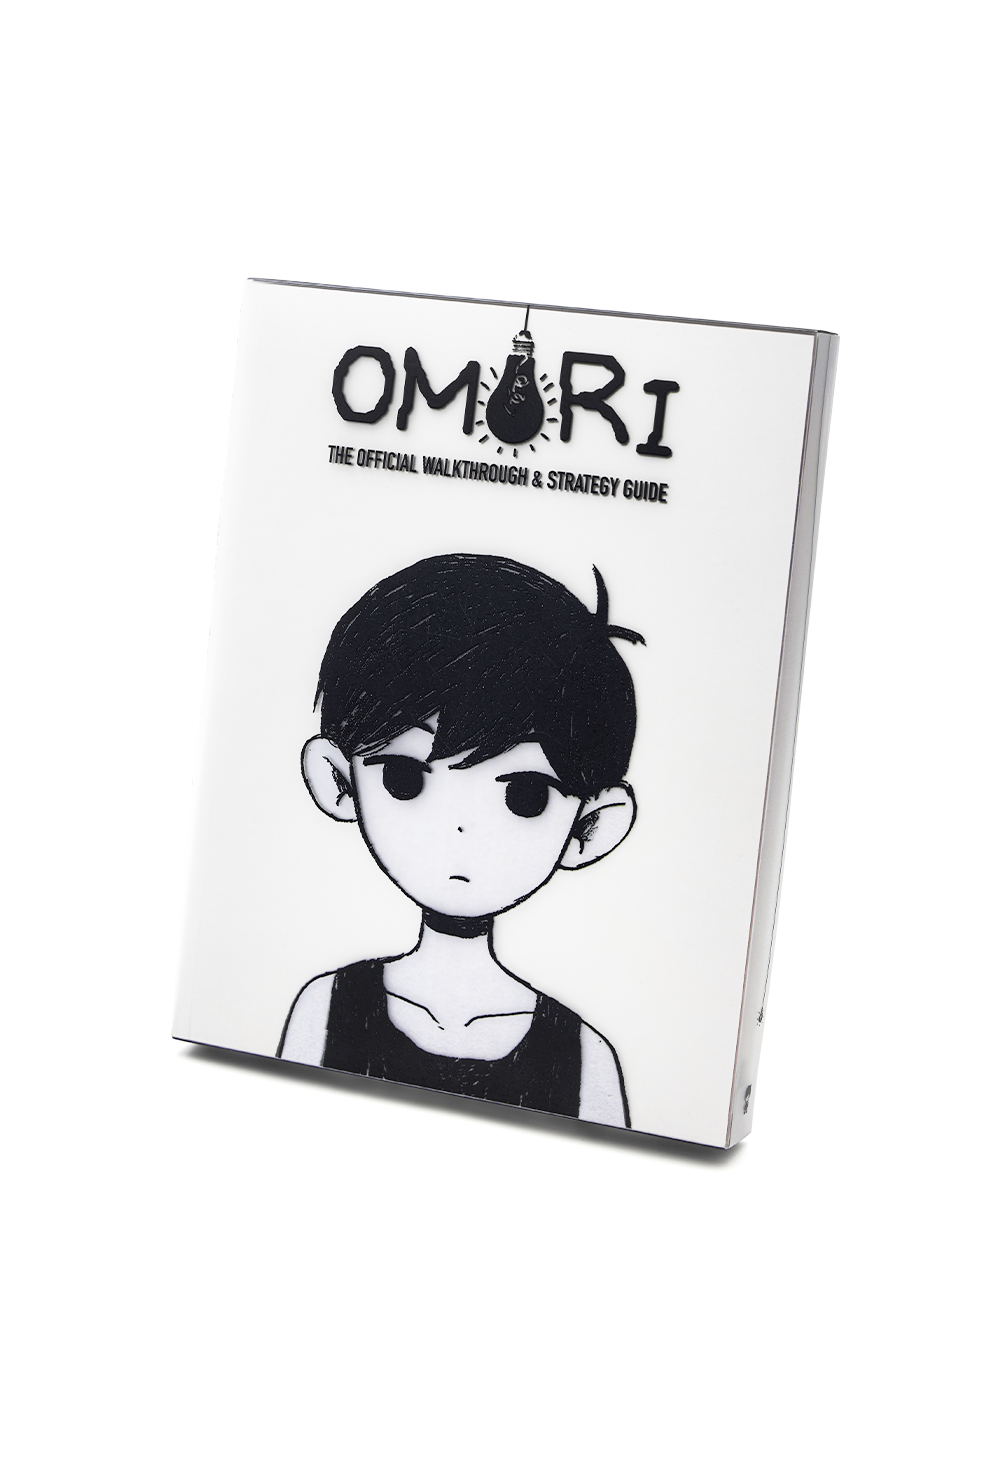 OMOCAT on X: OMORI plushies are now open for pre-order!  (  / X